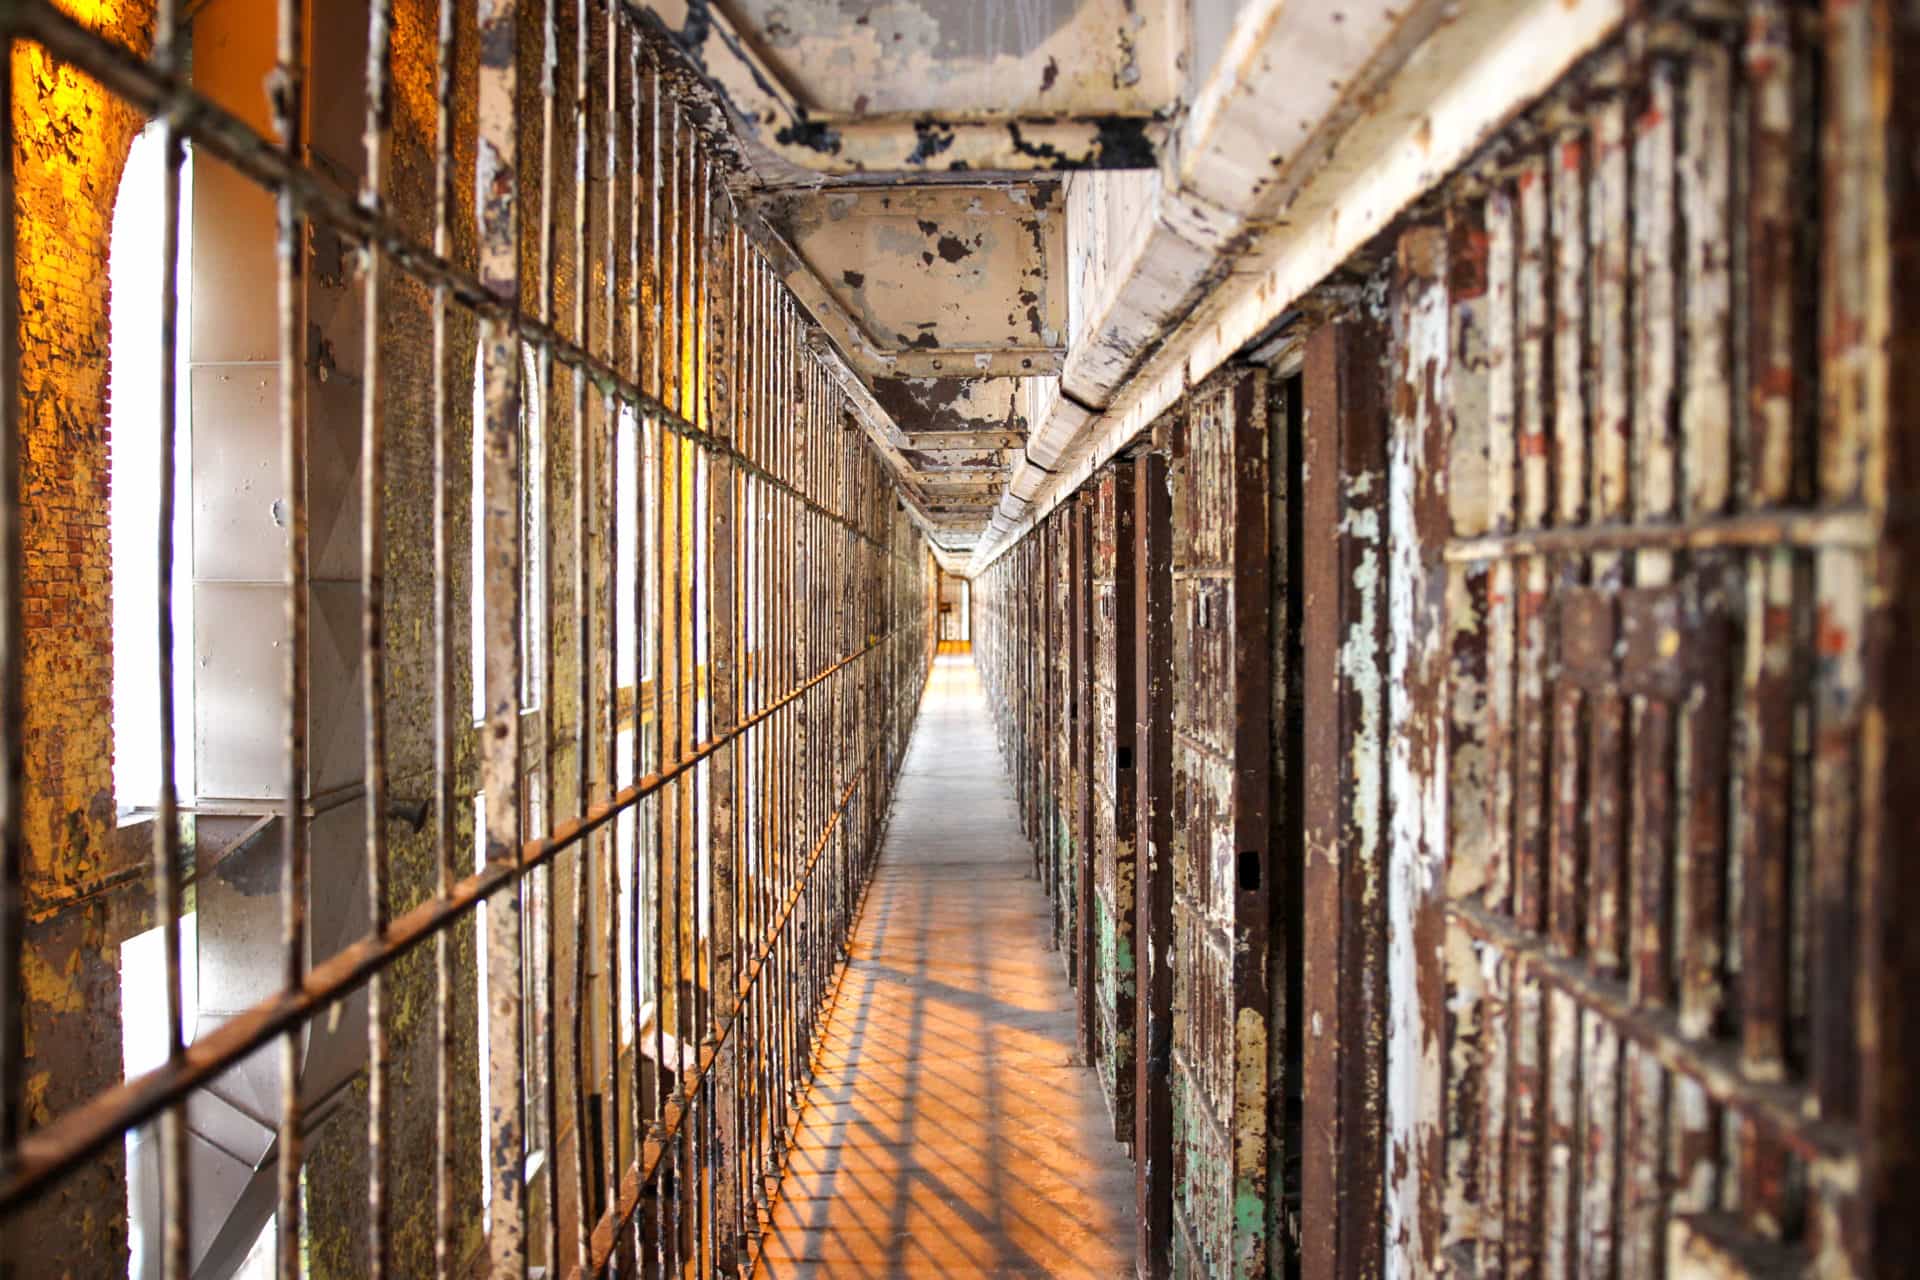 A cell block inside the ohio state reformatory 